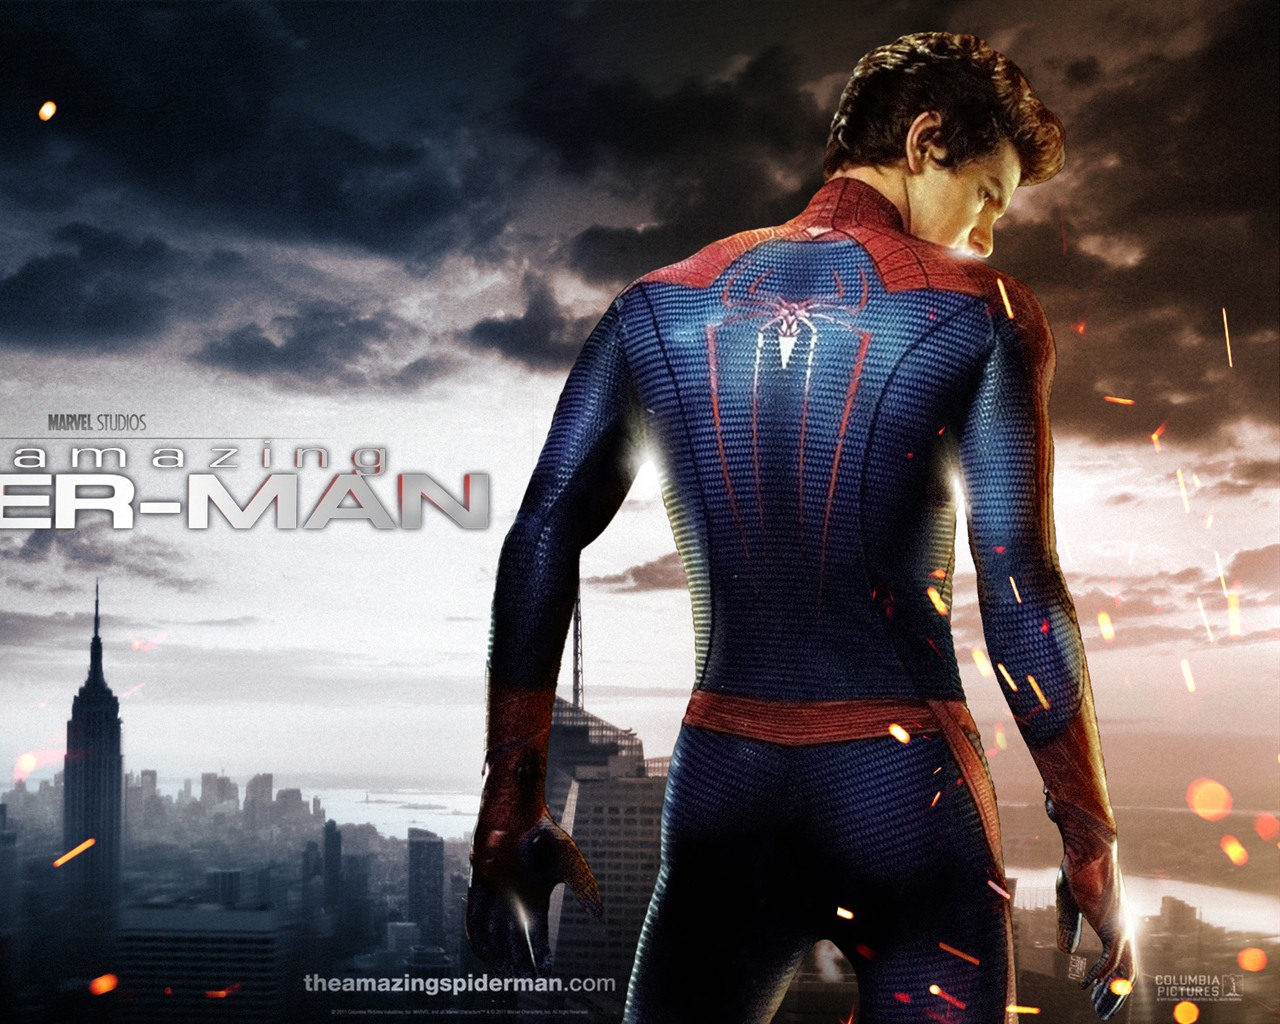 The Amazing Spider-Man 2012 wallpapers #1 - 1280x1024